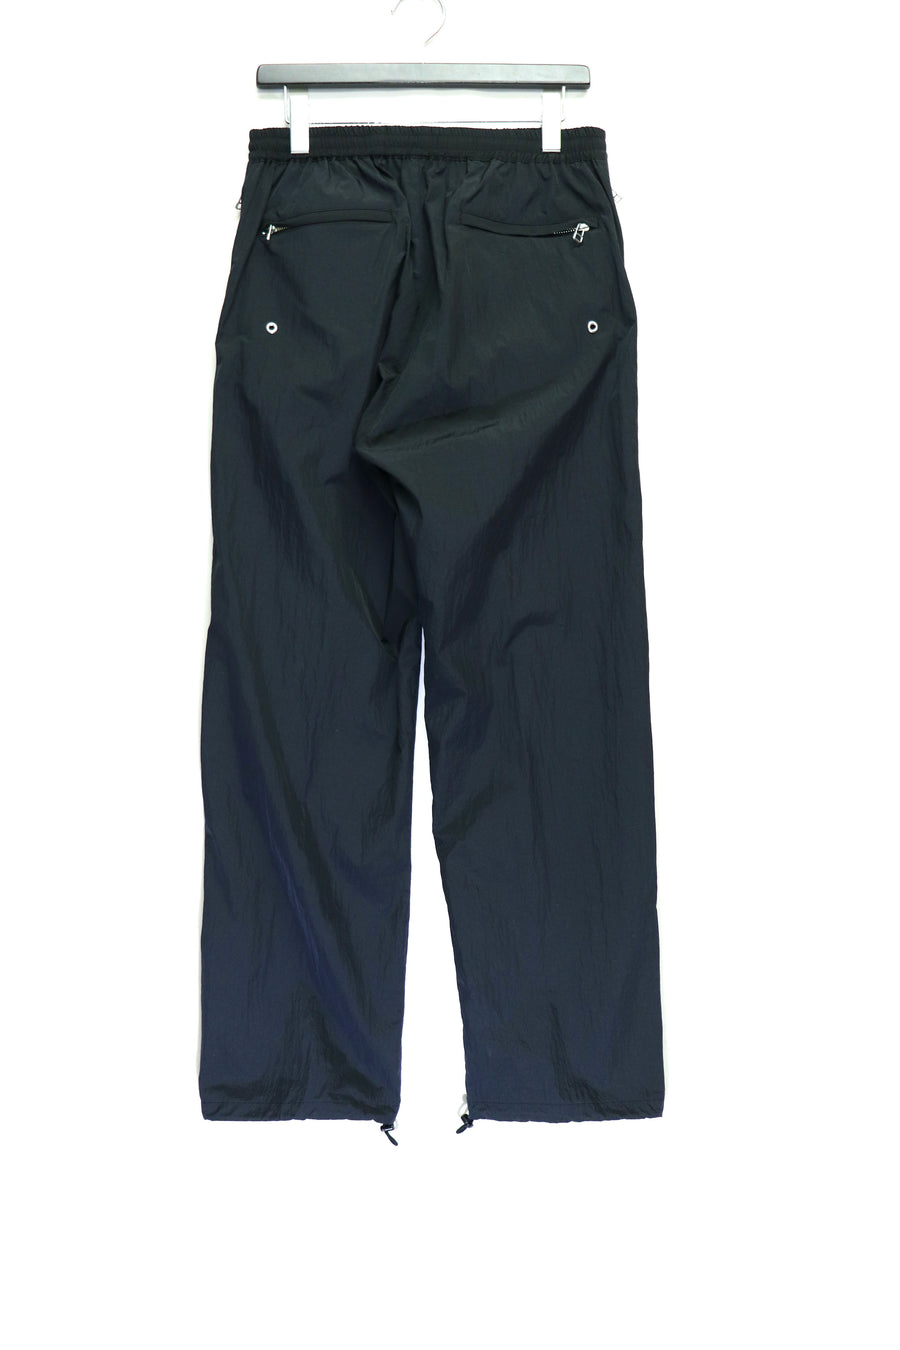 BED j.w. FORD  Training Cargo Pants